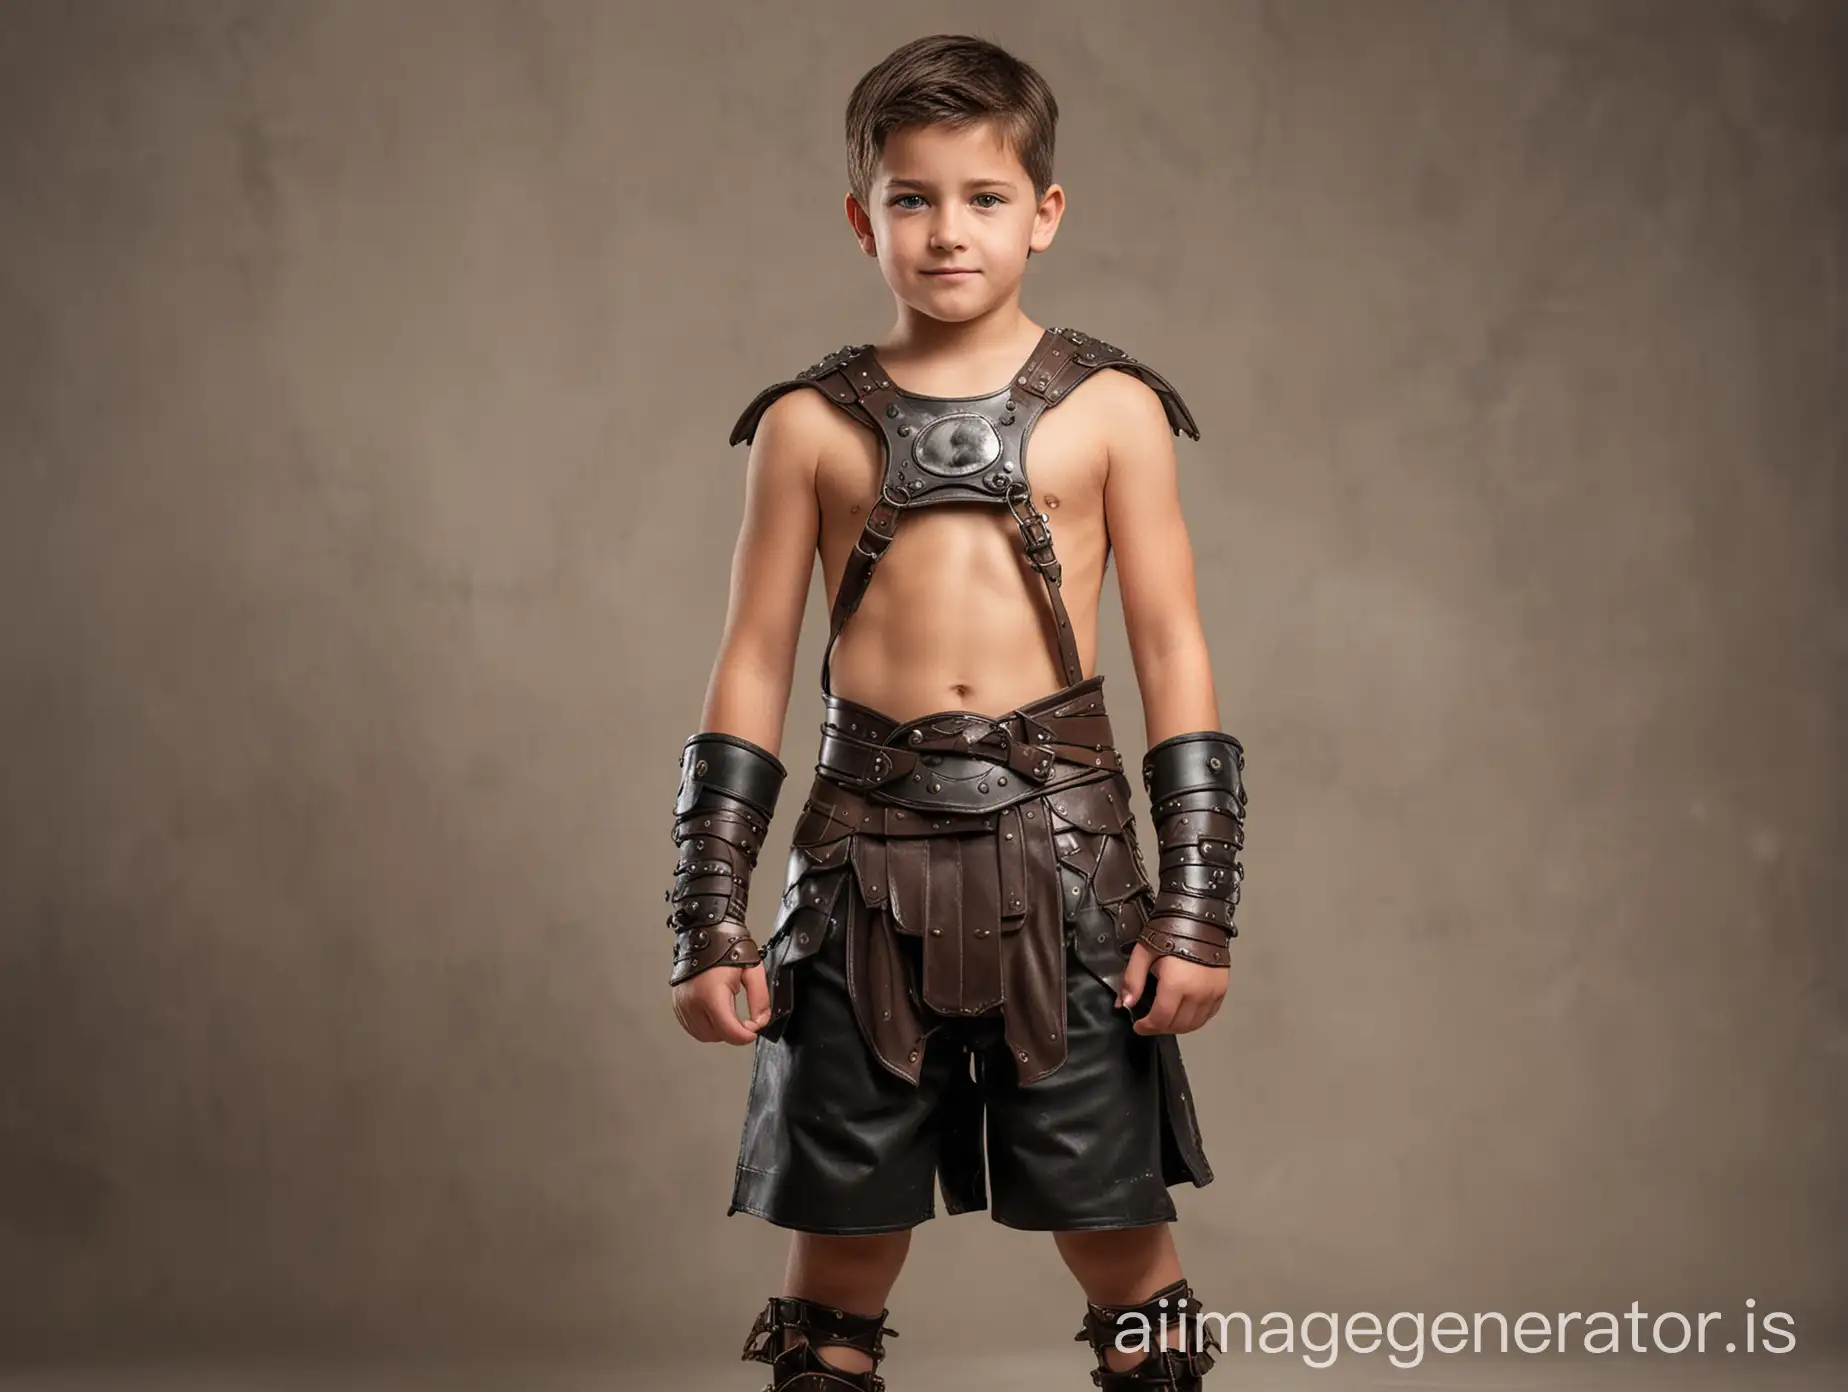 Create a gladiator outfit for a strong 13 year old boy villain with abs, cool,   leather,  metal underwear bikini,  comfortable yet intimidating, standing straight facing camera, full body, wearing gladiator sandals with straps